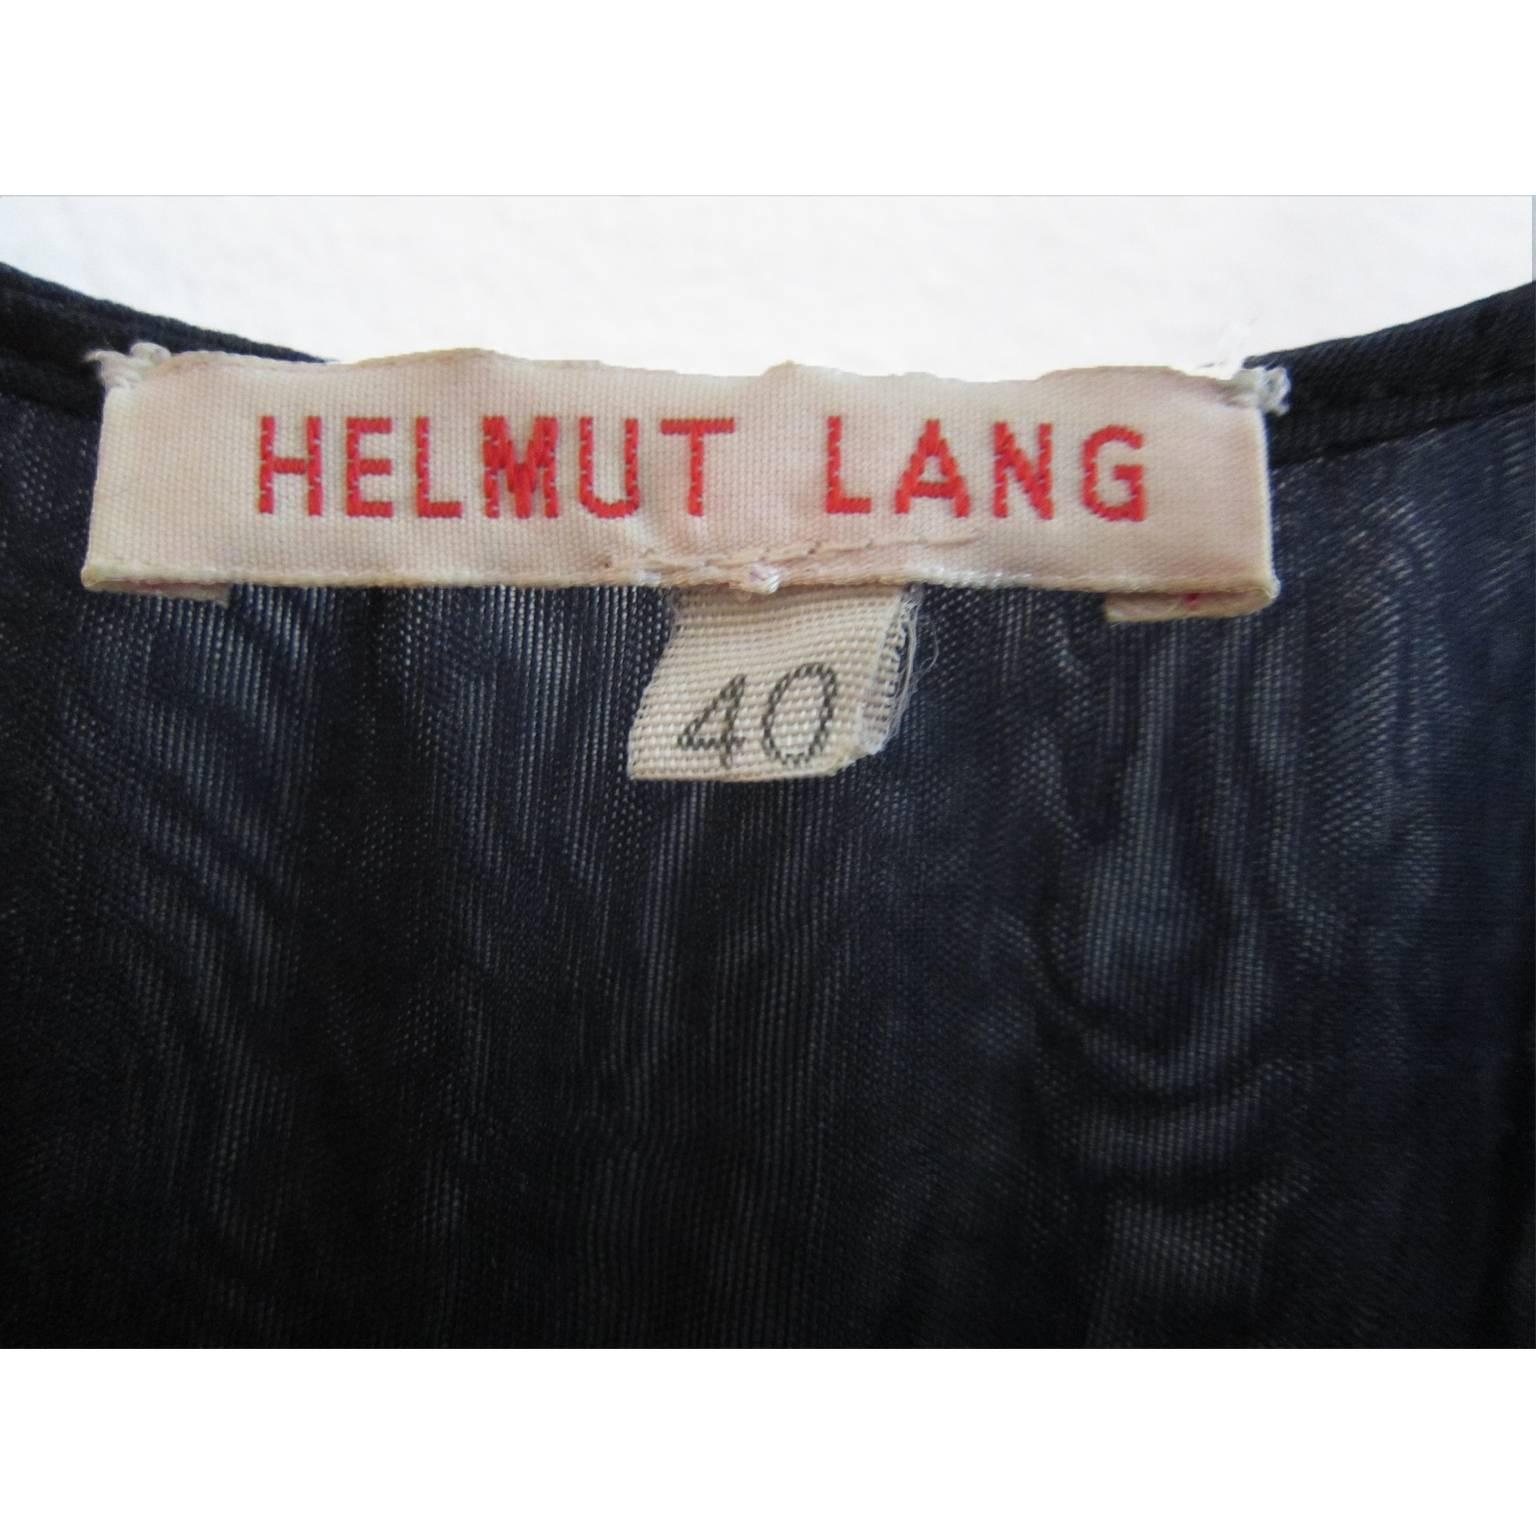 Helmut Lang Sheer Navy Layered Dress SS 1995 For Sale 1